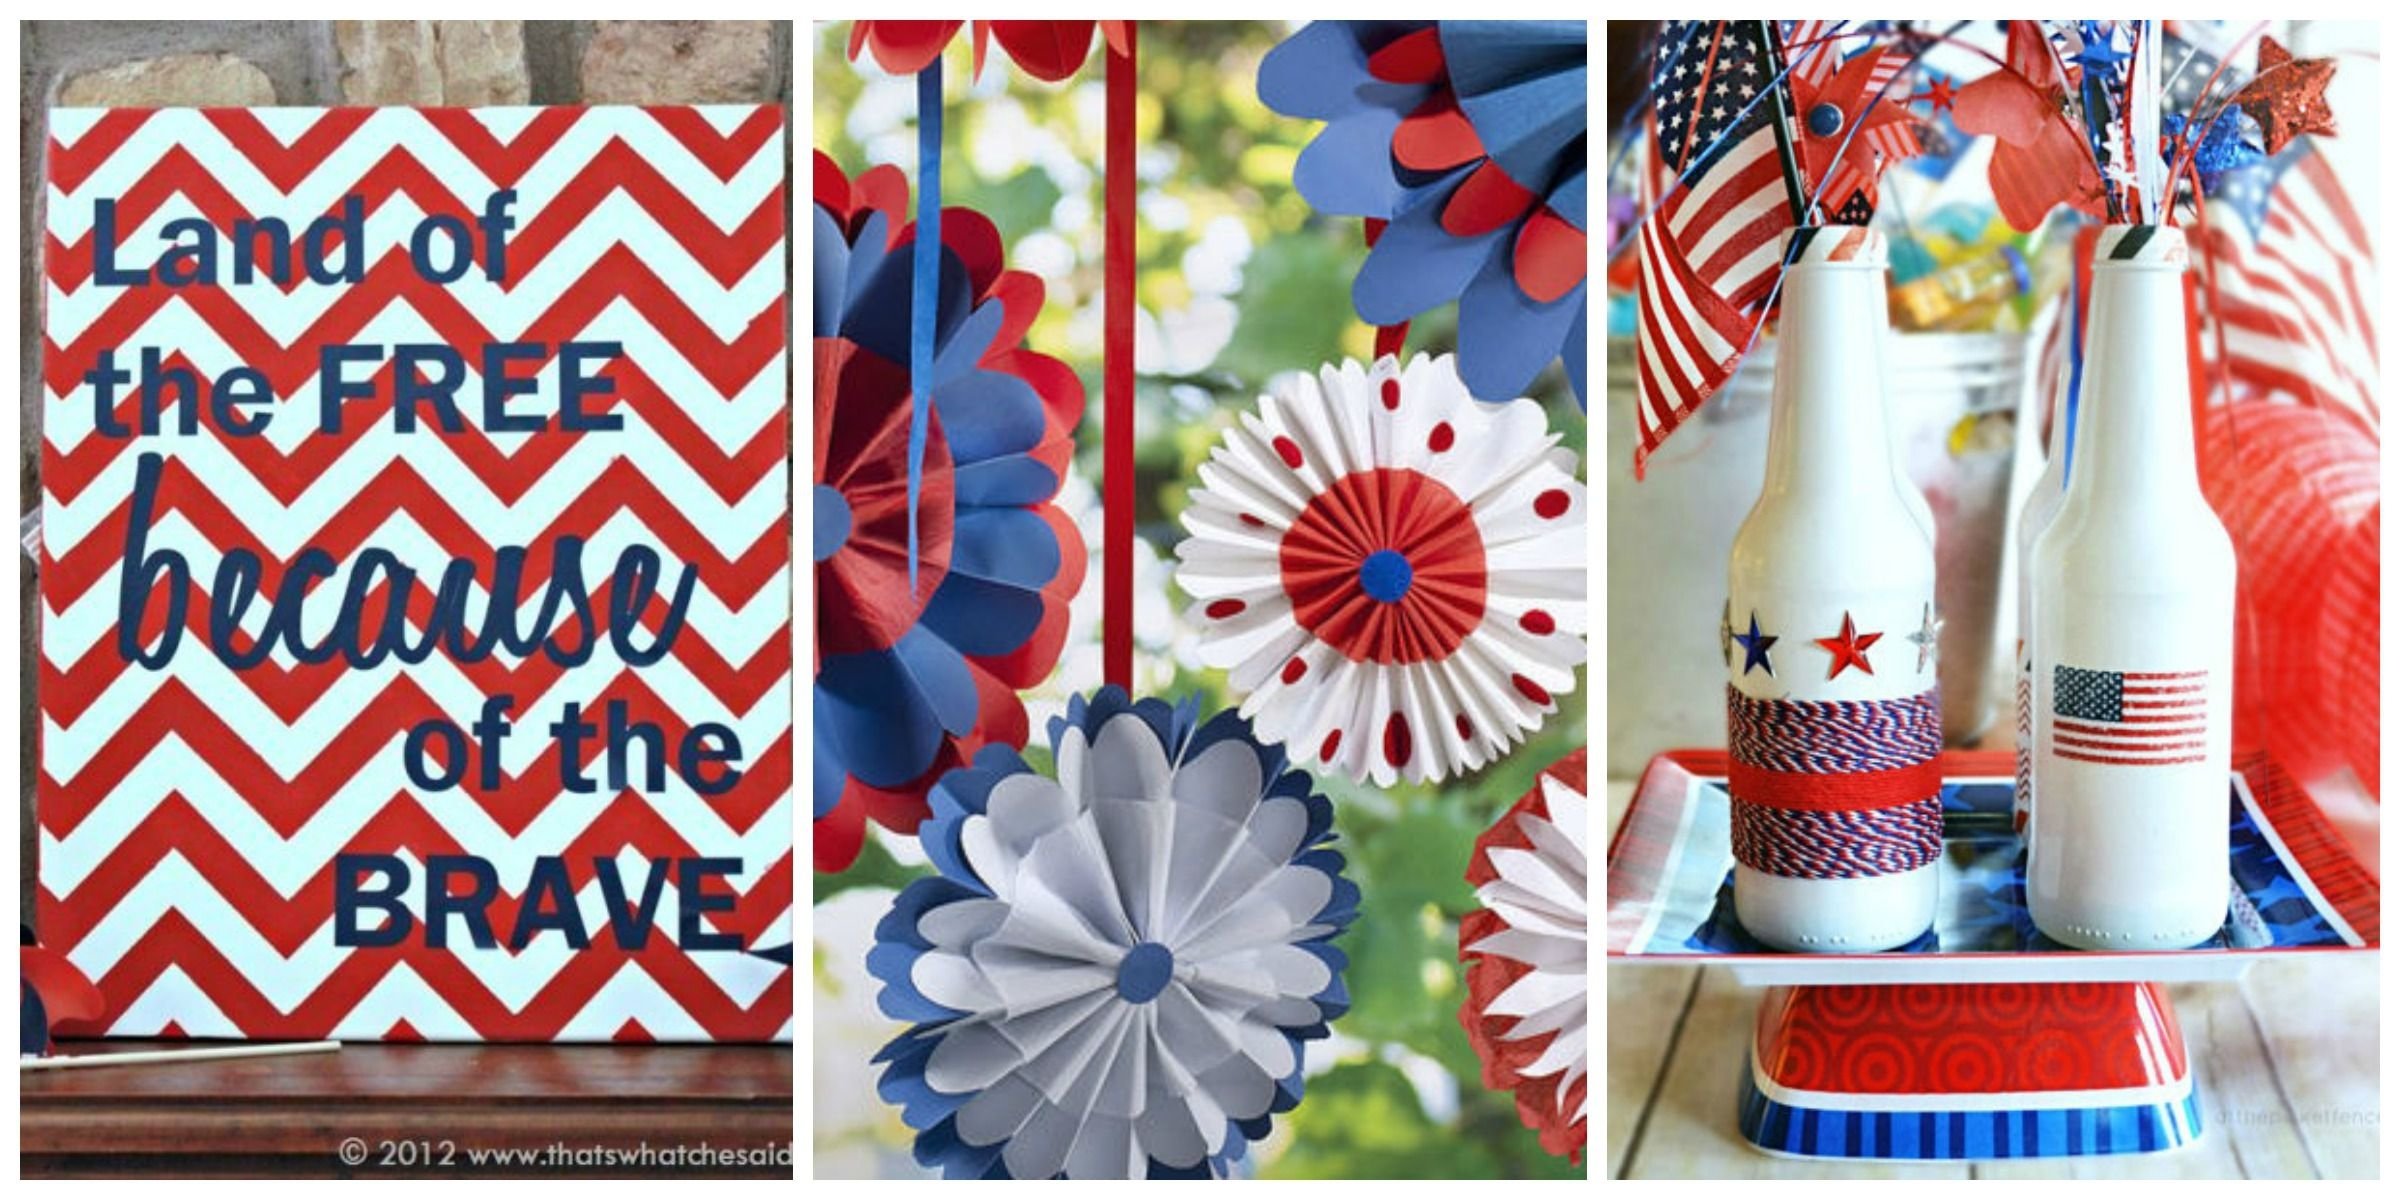 10 Best Fourth Of July Craft Ideas 26 easy 4th of july crafts patriotic craft ideas diy decorations 1 2022